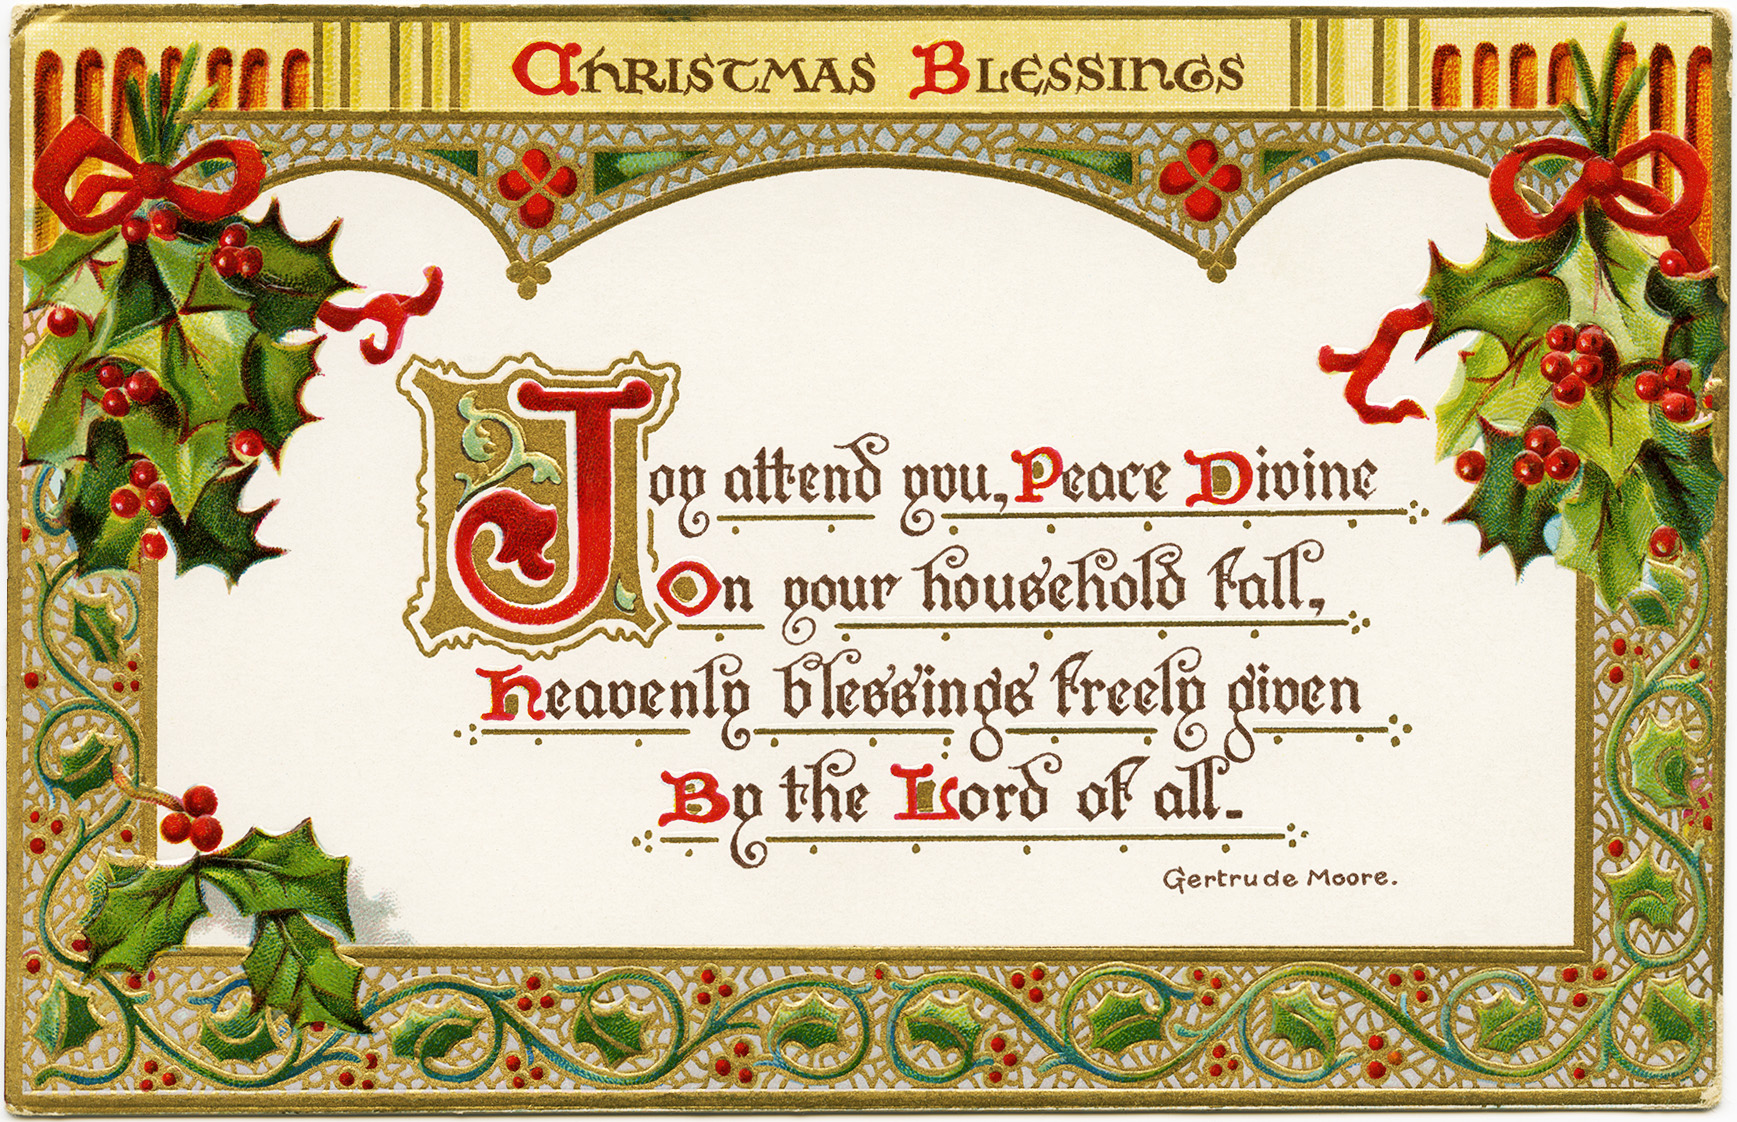 Christmas Blessings ~ Free Vintage Postcard Graphic  Old 